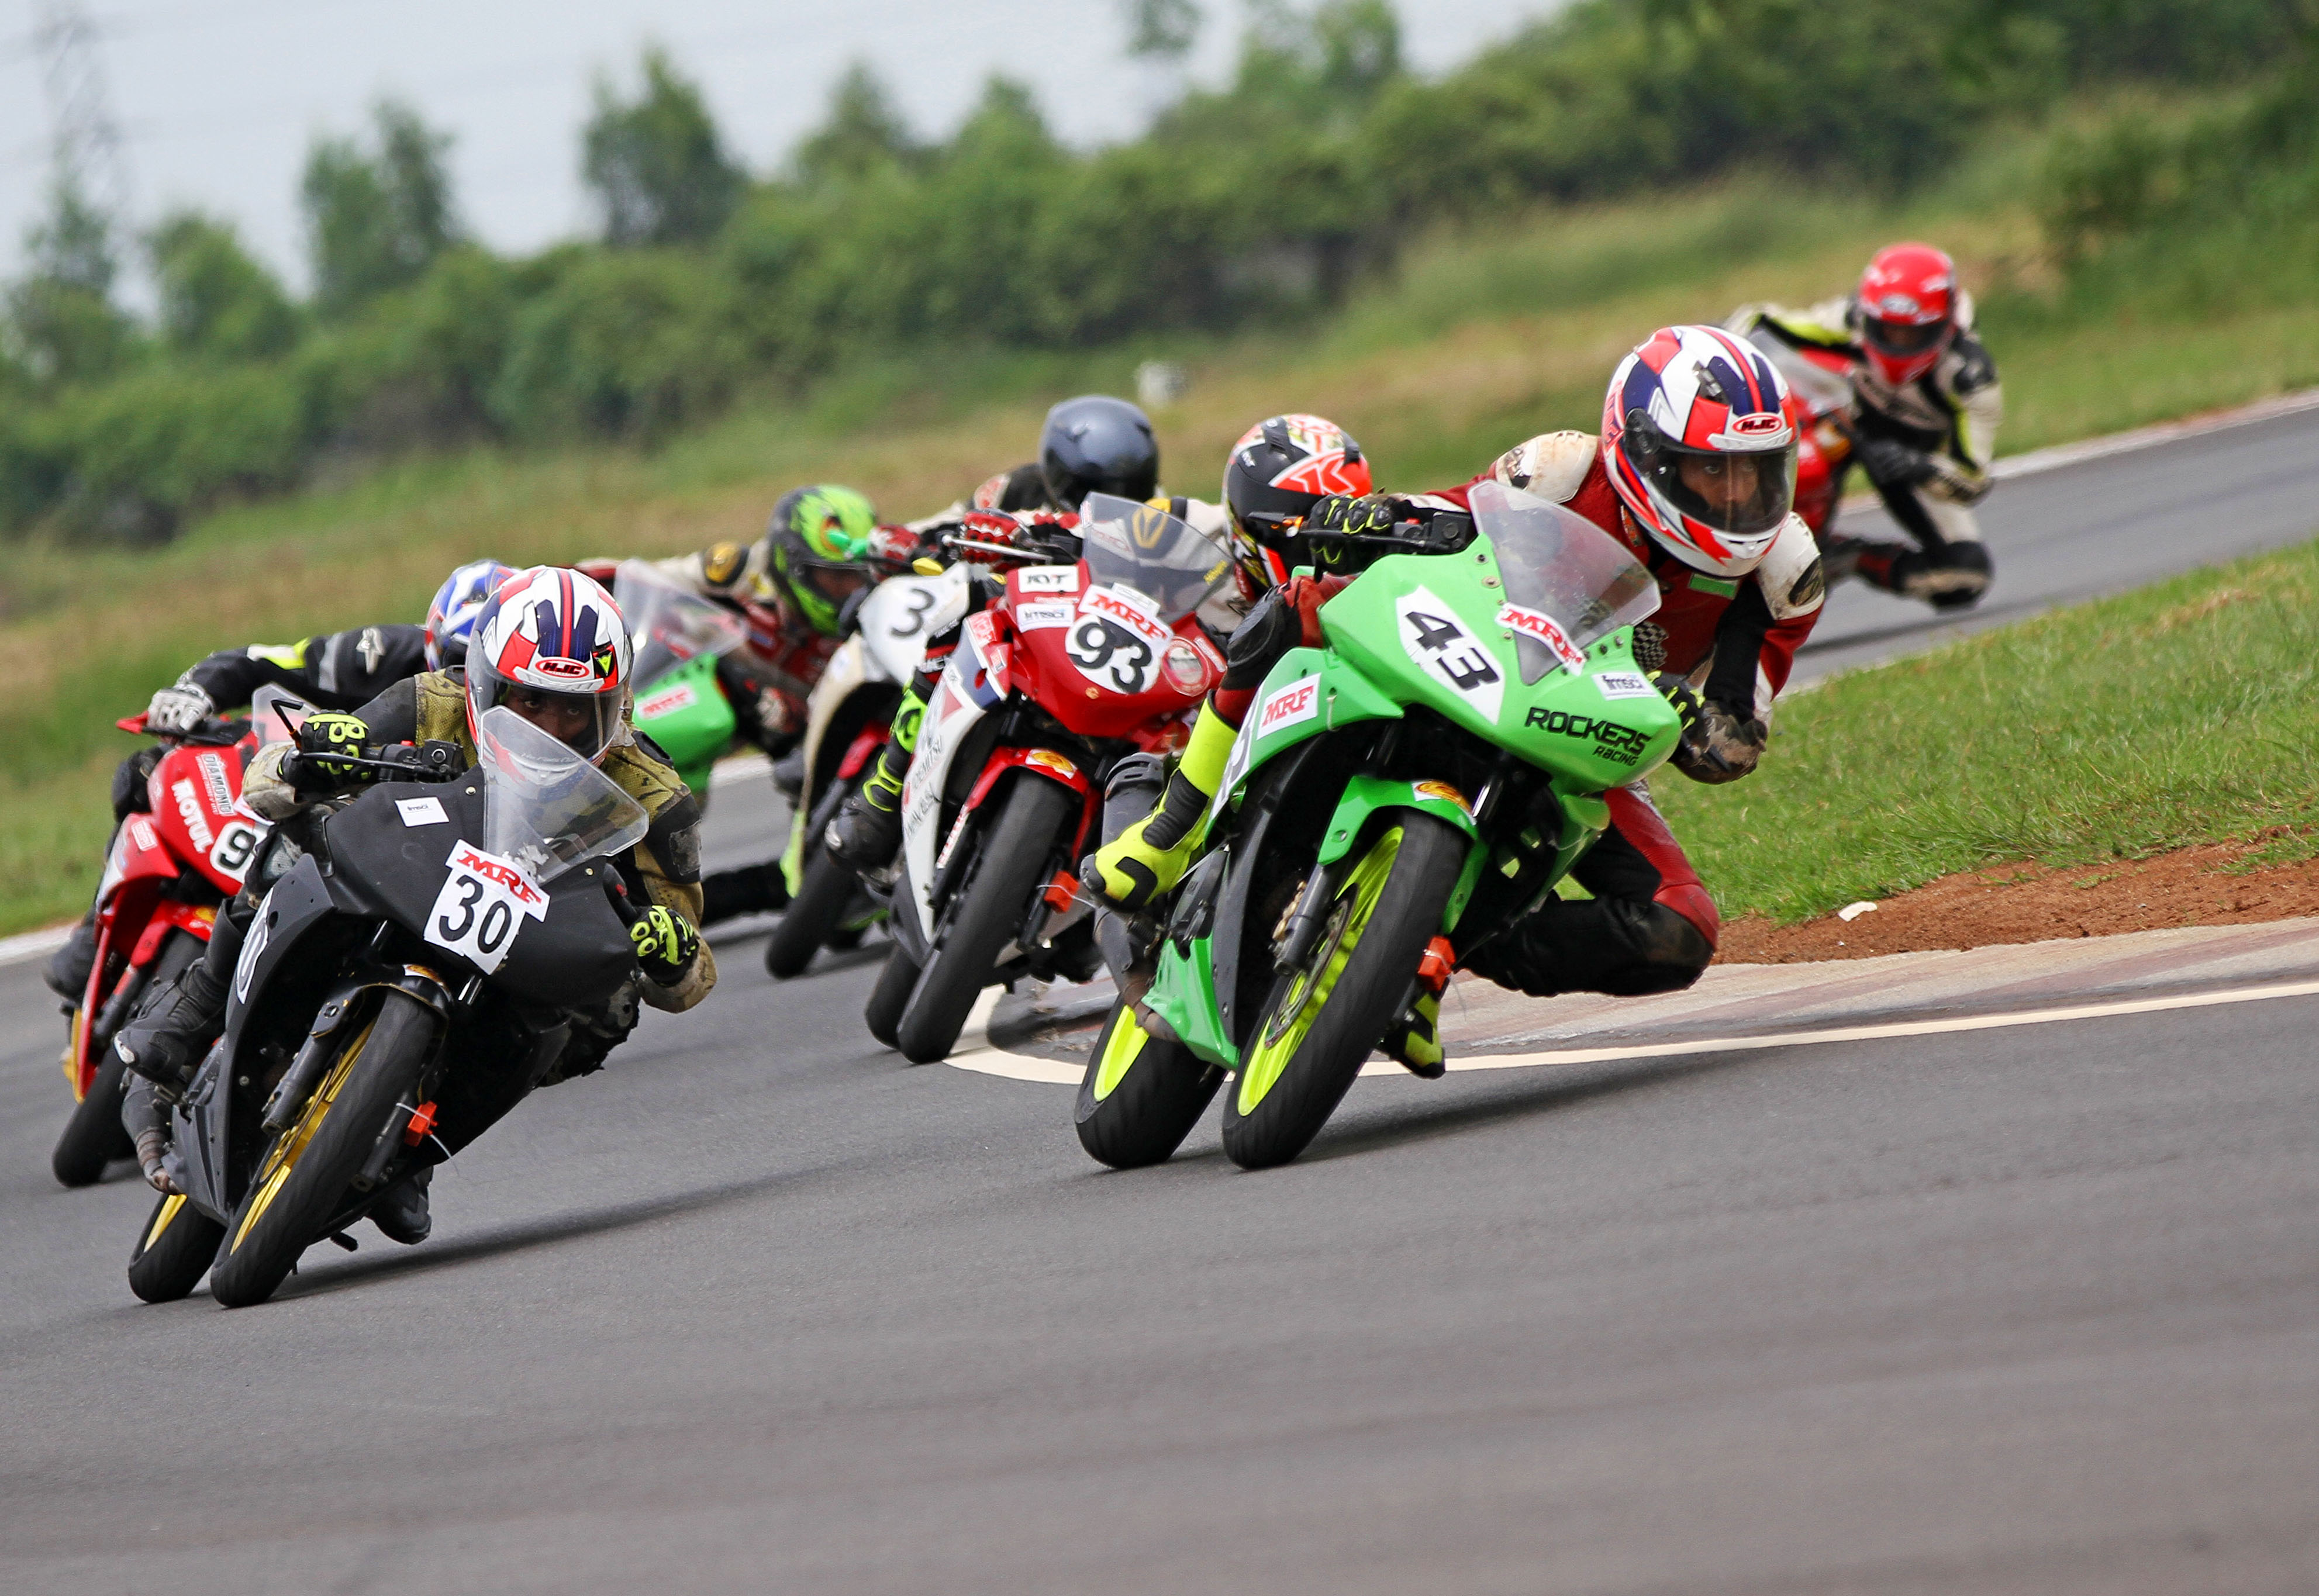 Photo of MRF slick tyres for bike races; stage set for Round 2 of National Championship at MMRT